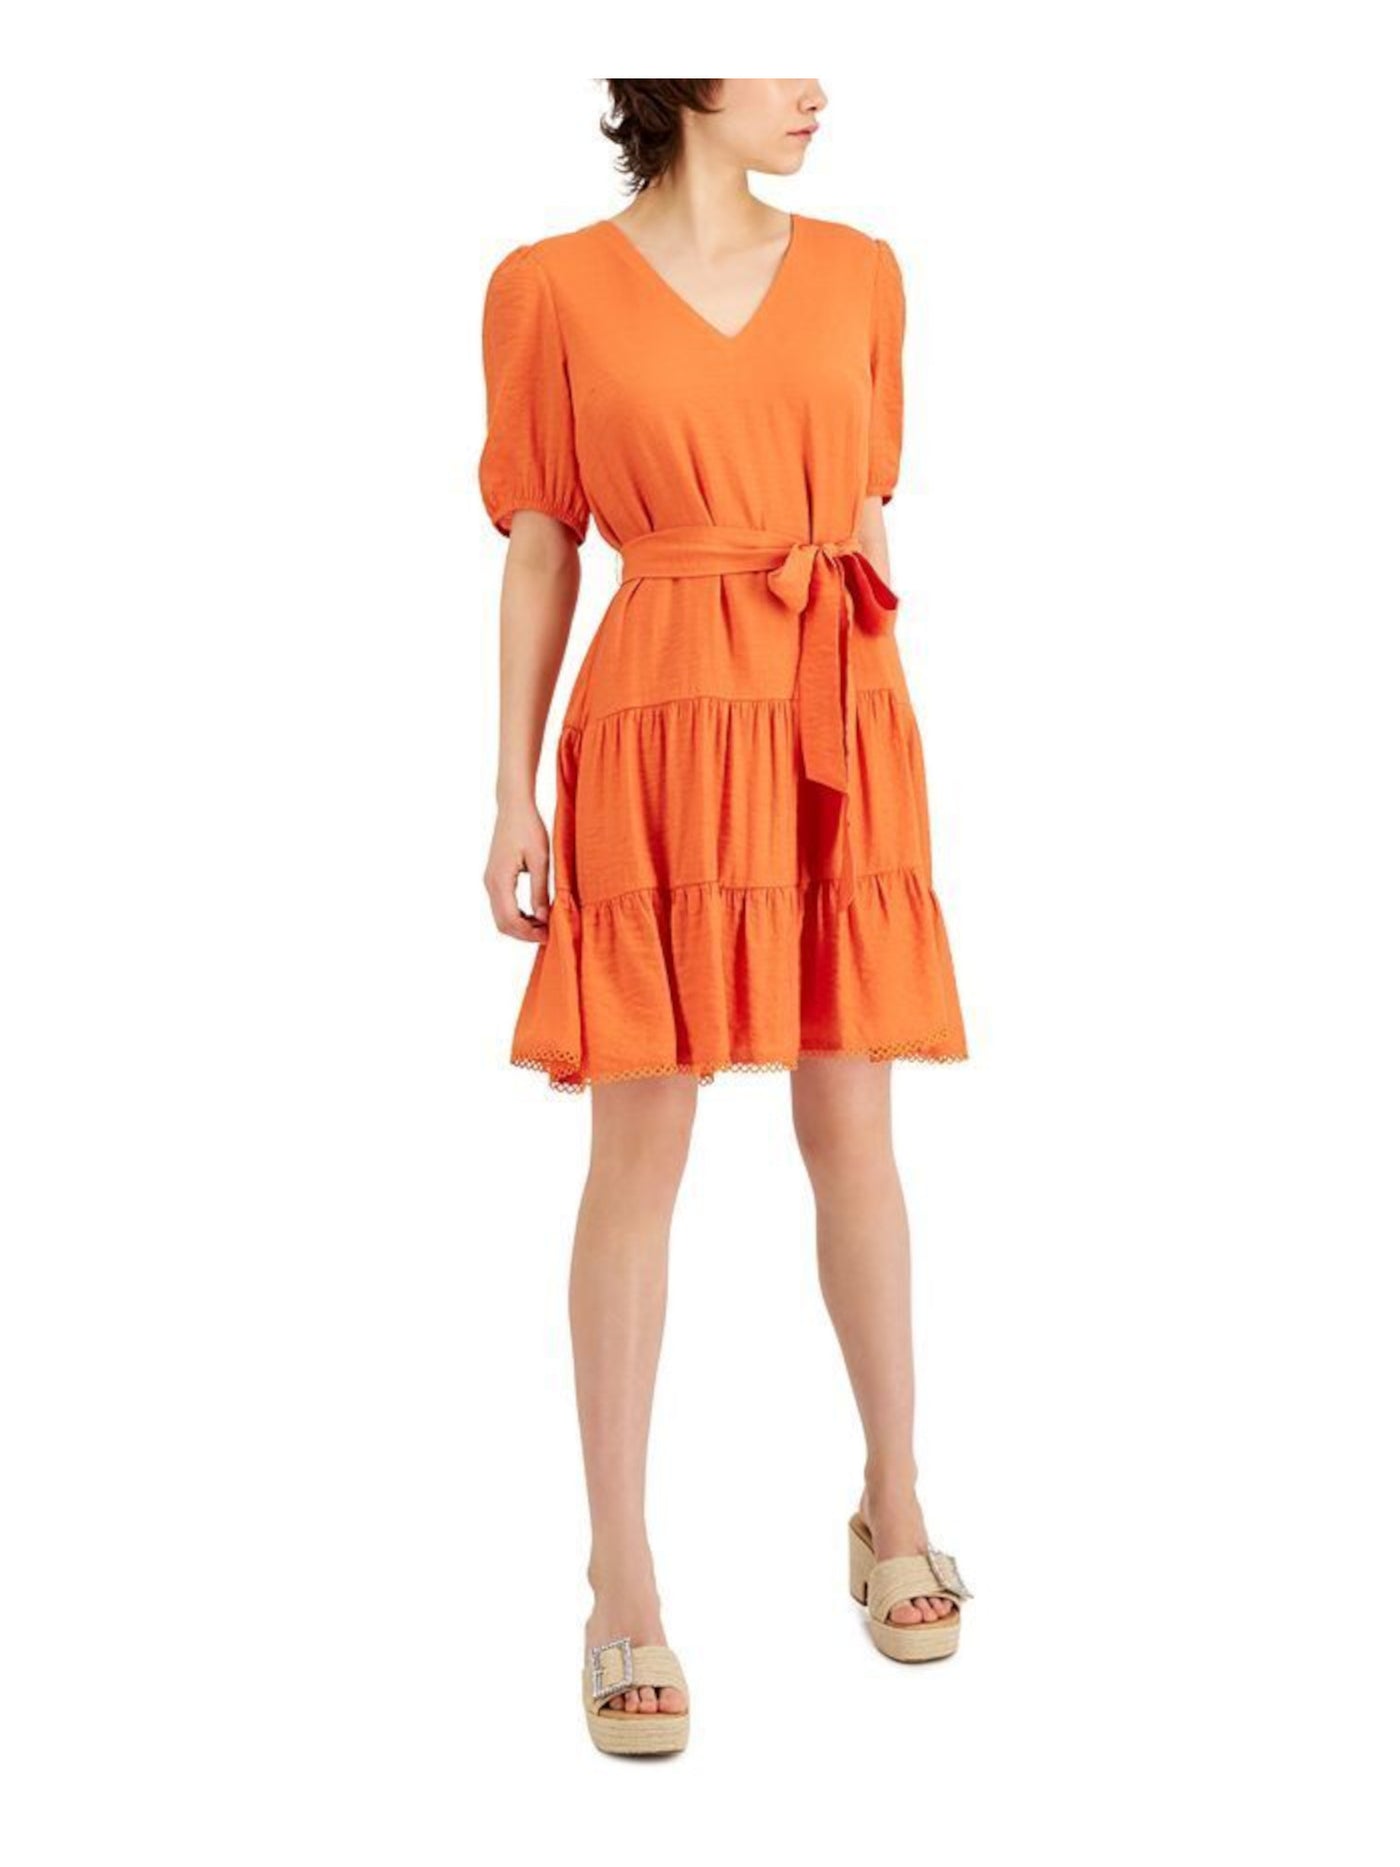 INC DRESSES Womens Orange Zippered Textured Tie Belt Lined Tie V Back Tiered Pouf Sleeve V Neck Above The Knee Fit + Flare Dress S